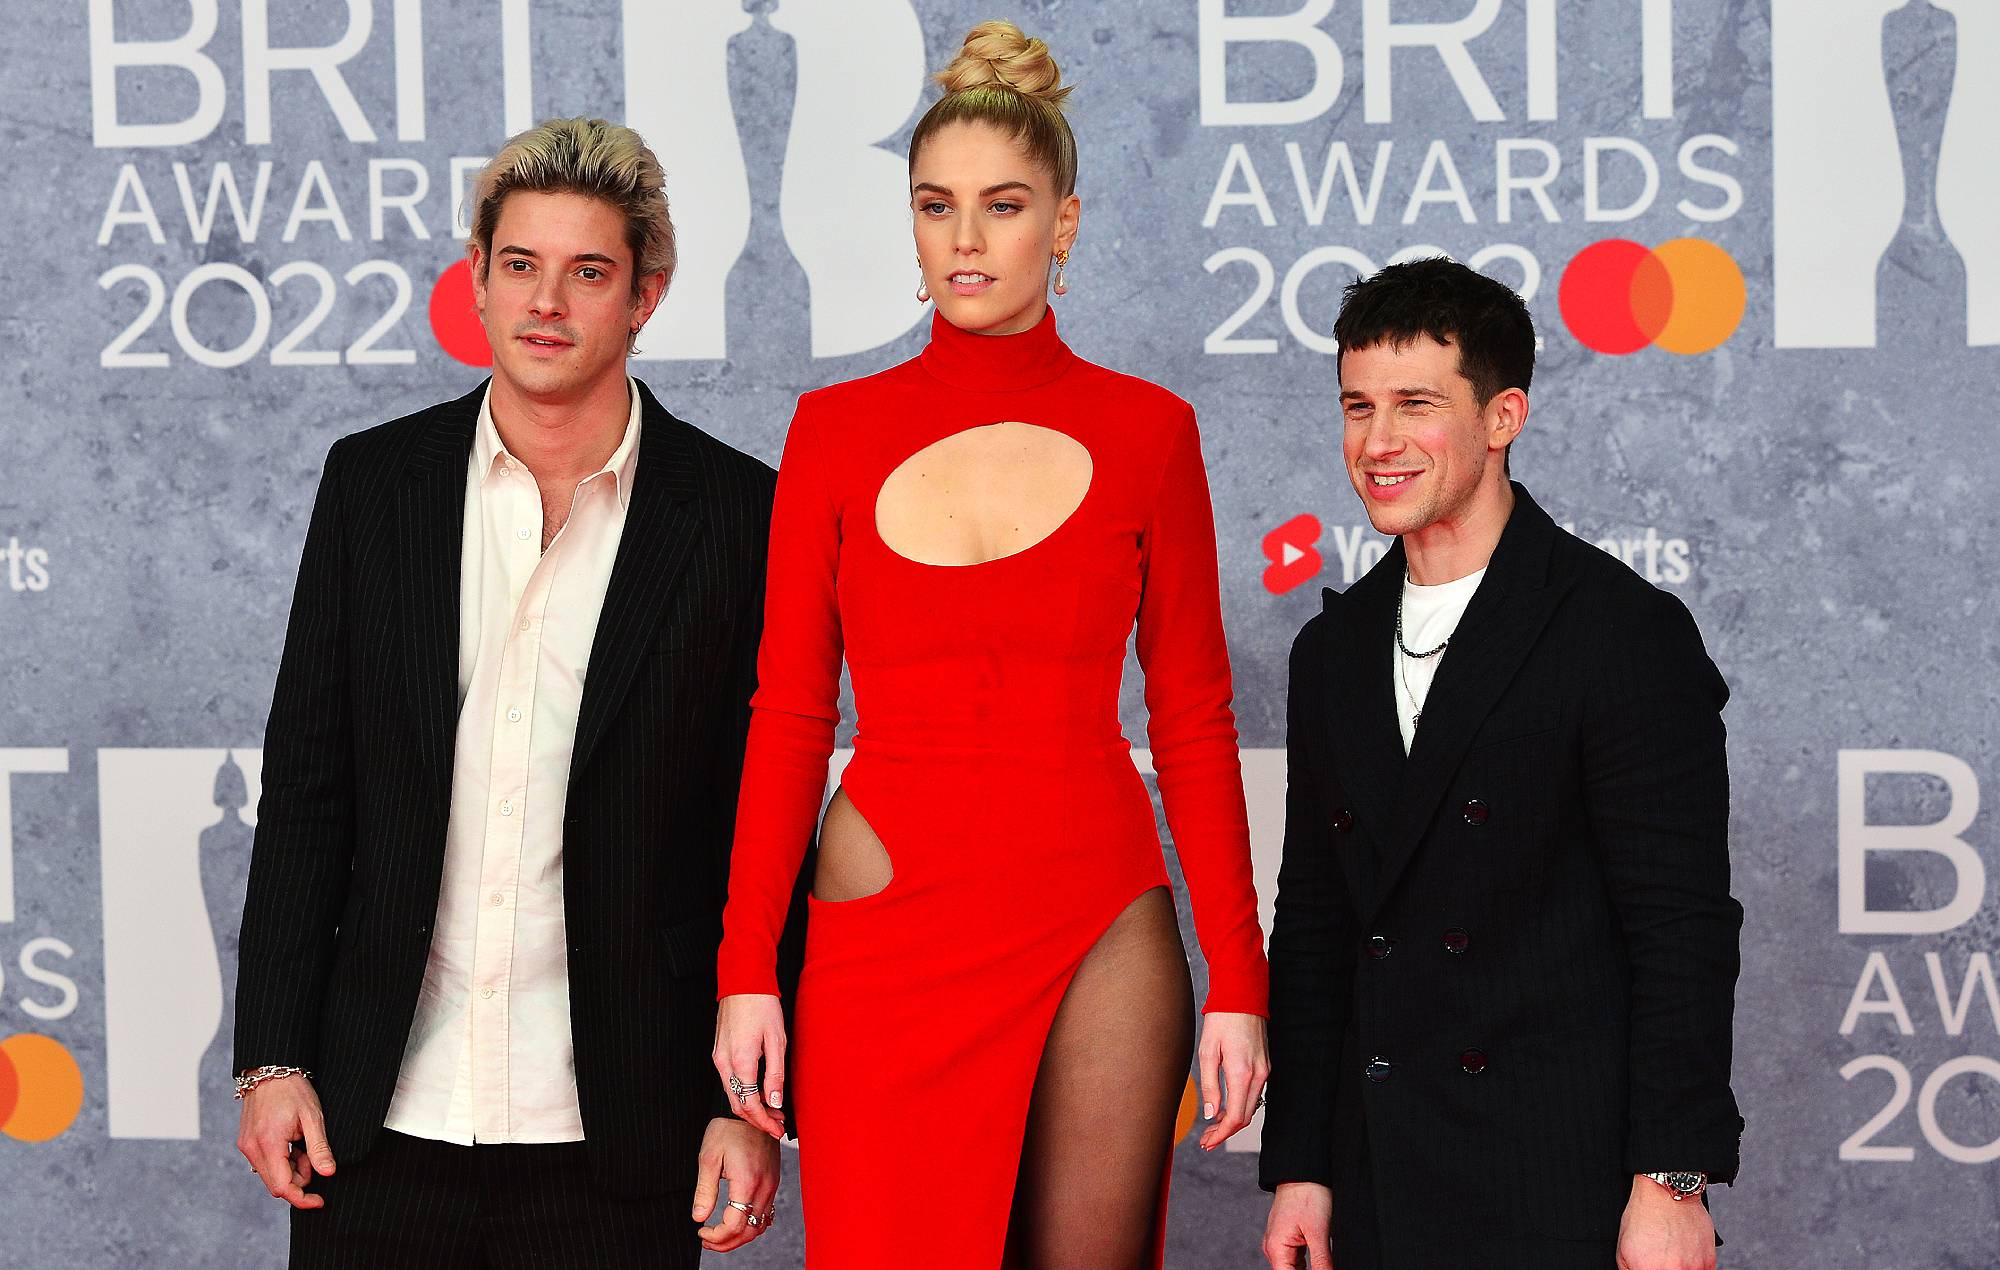 London Grammar say their “deep” next album “is actually the best one yet”